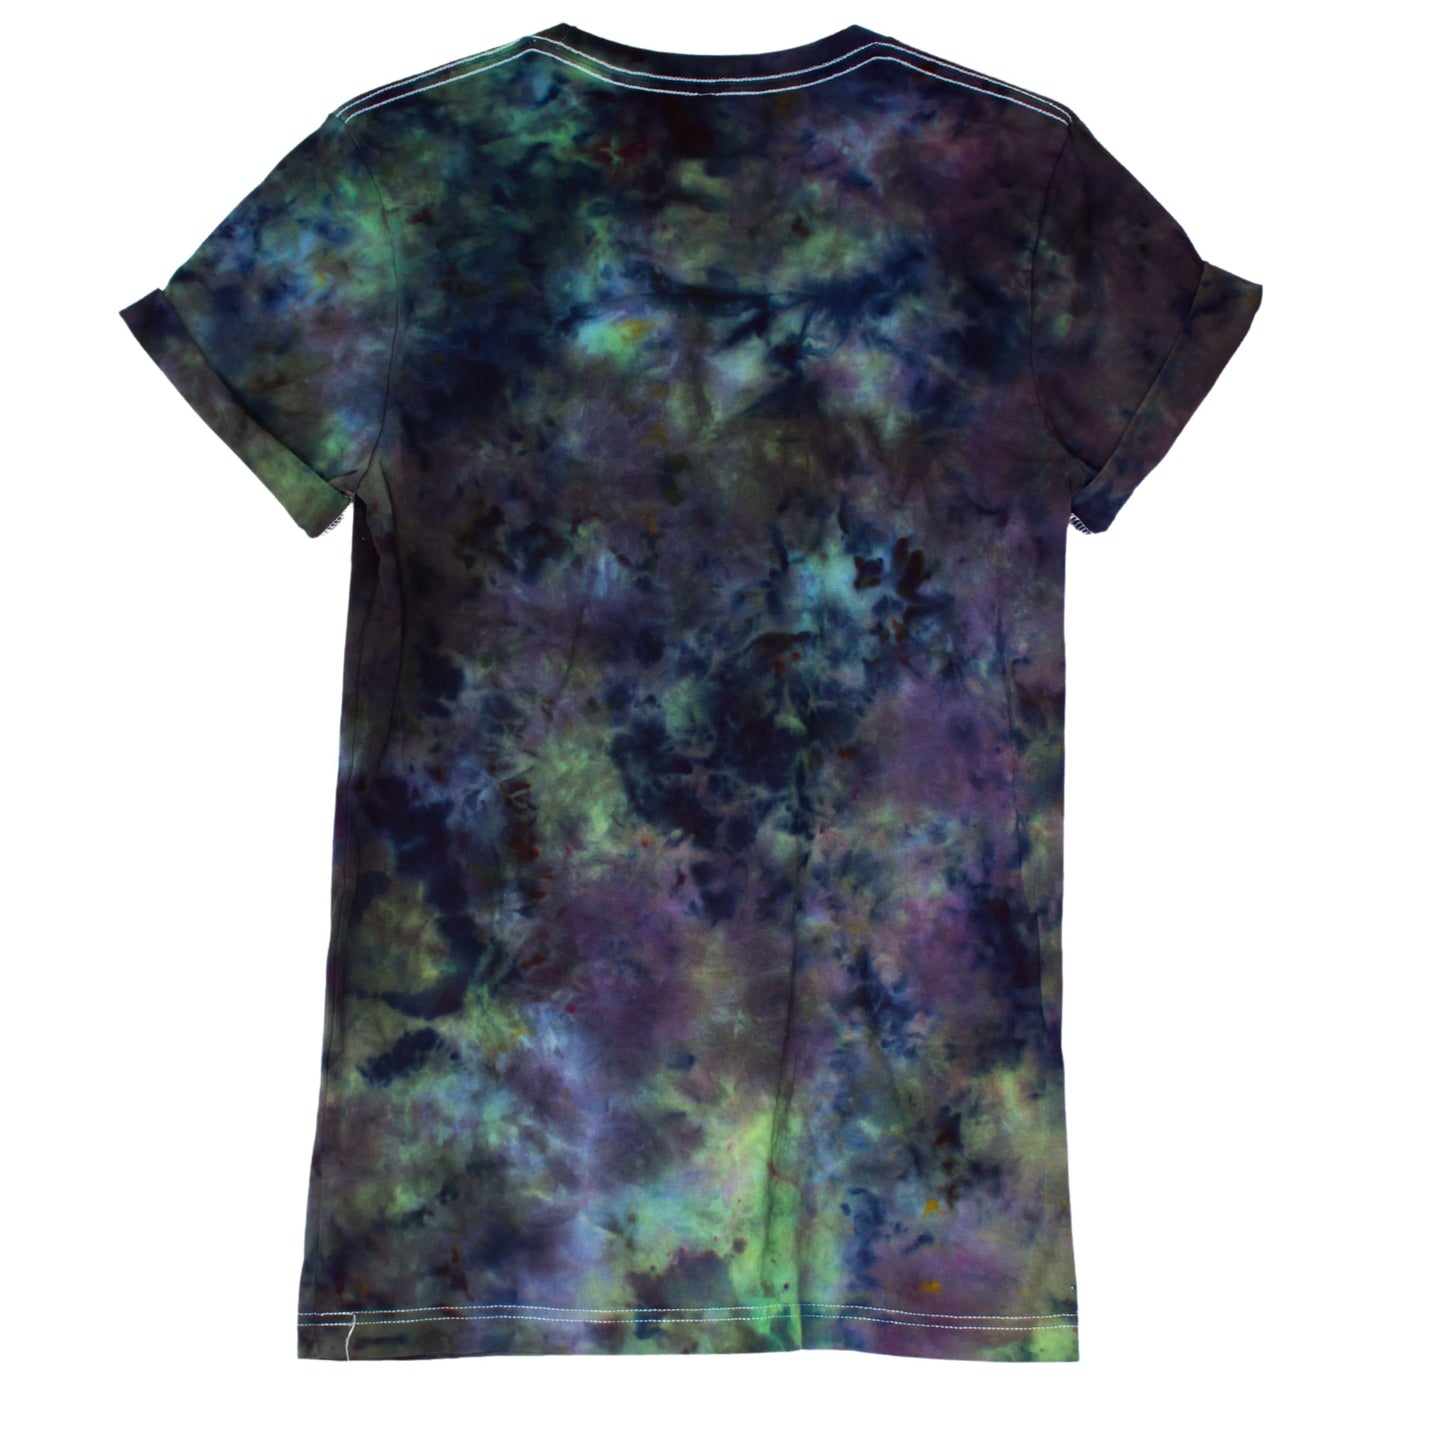 Blue Green and Black constellation nebula tie dye shirt cotton shirt for astronomy